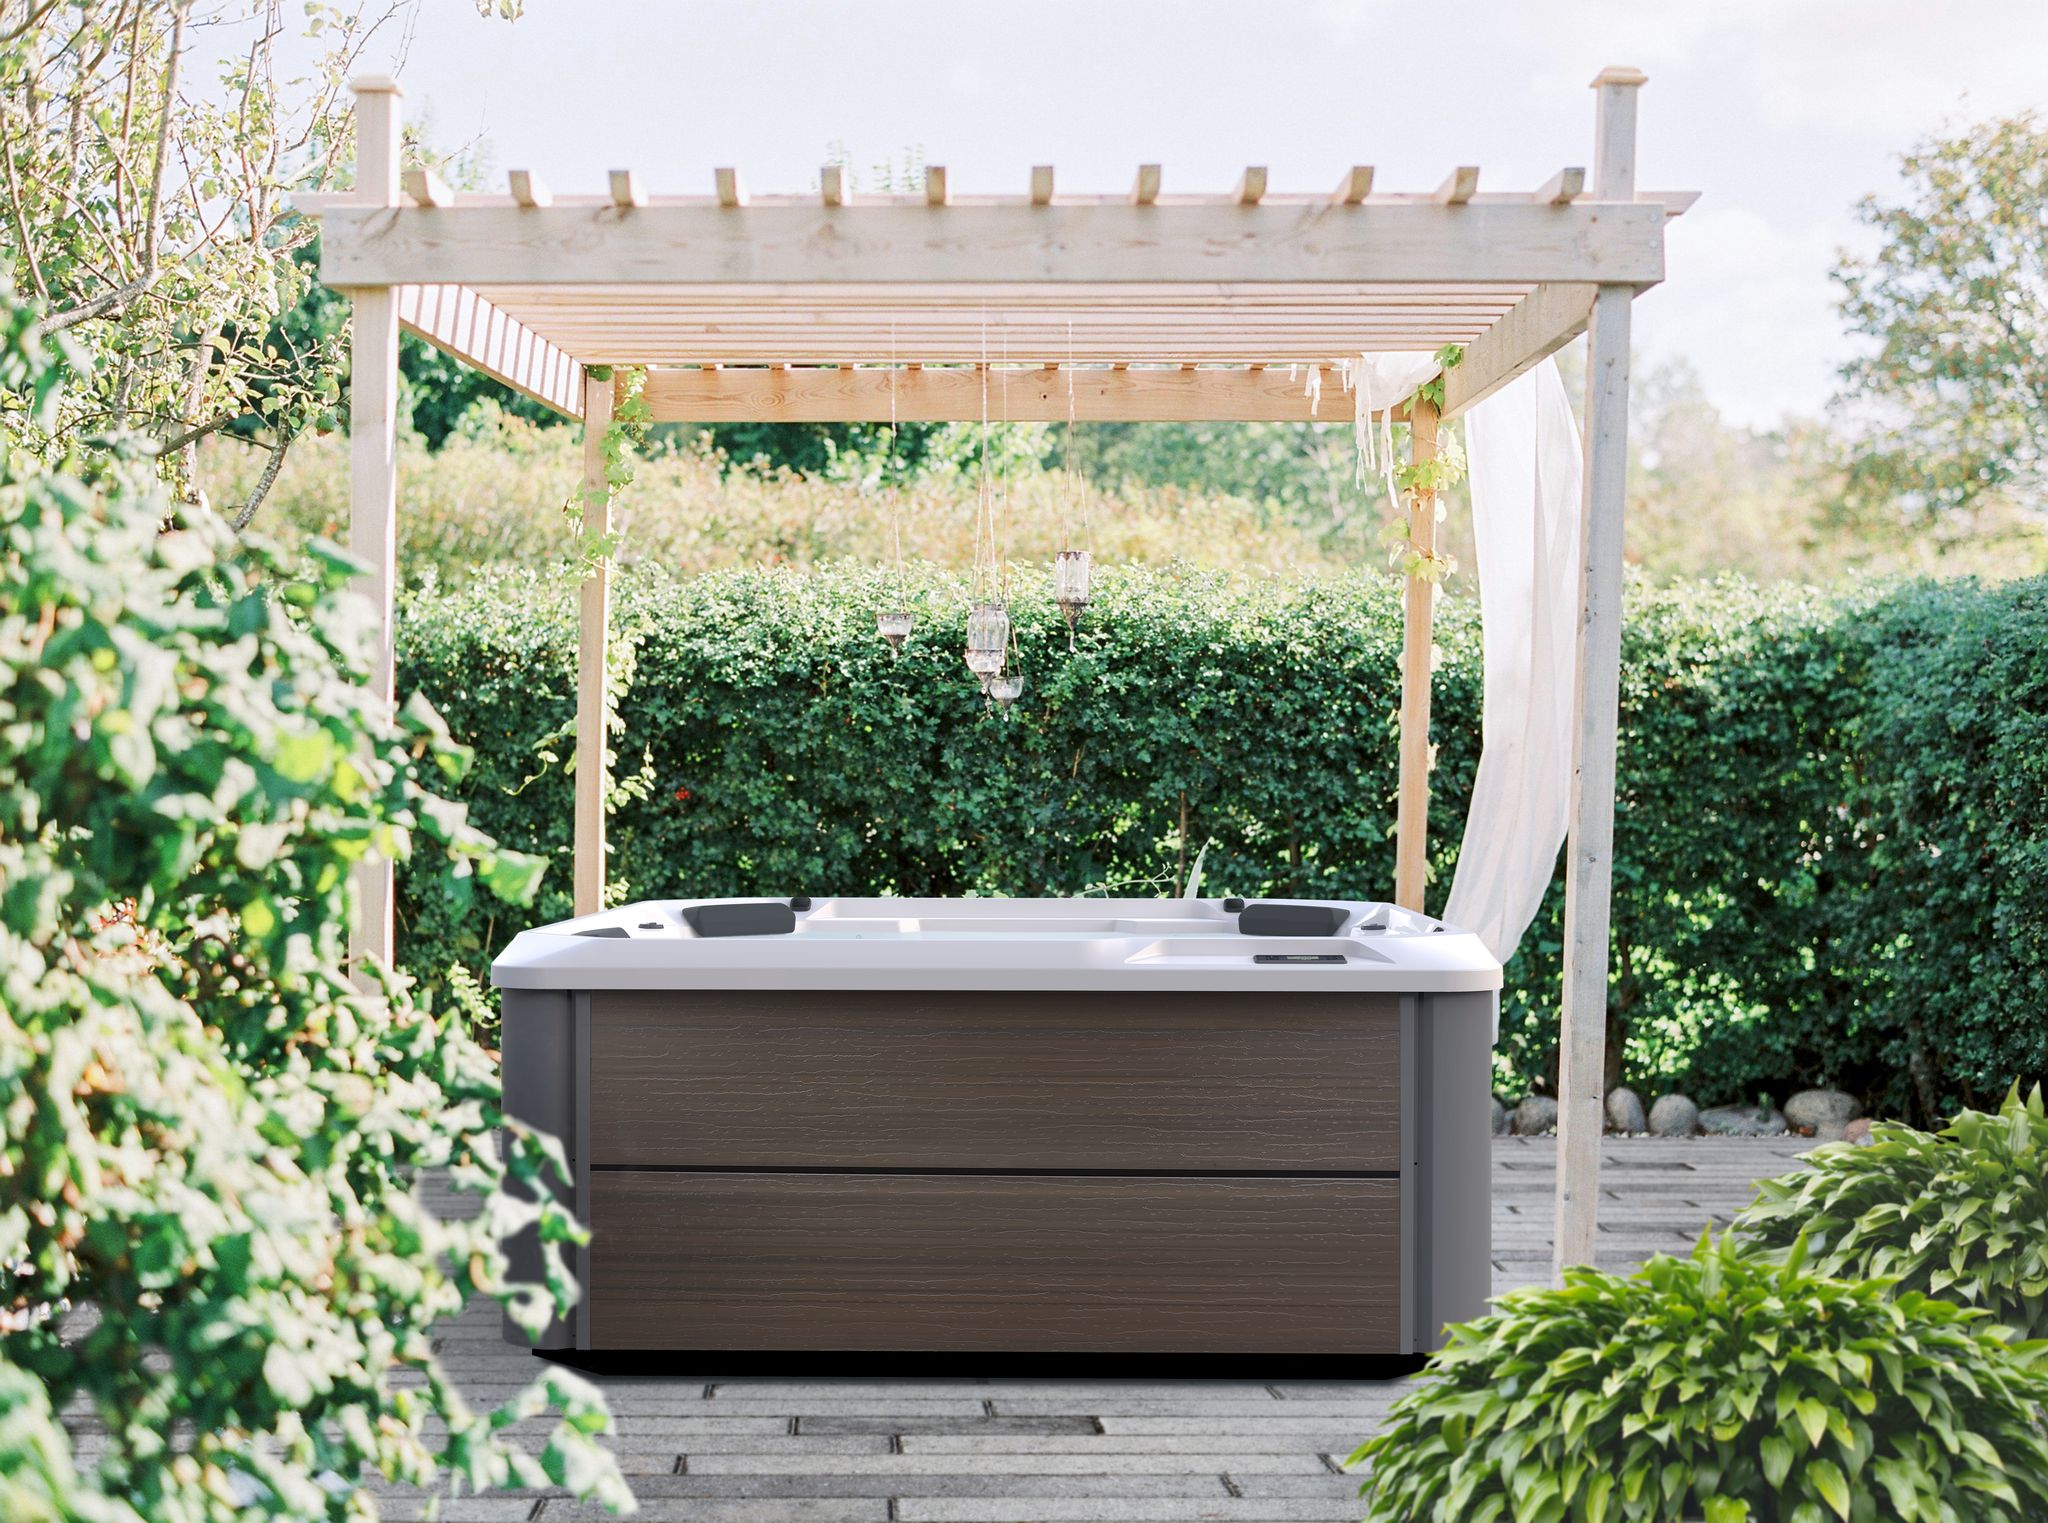 Creating Privacy Around Your Hot Tub